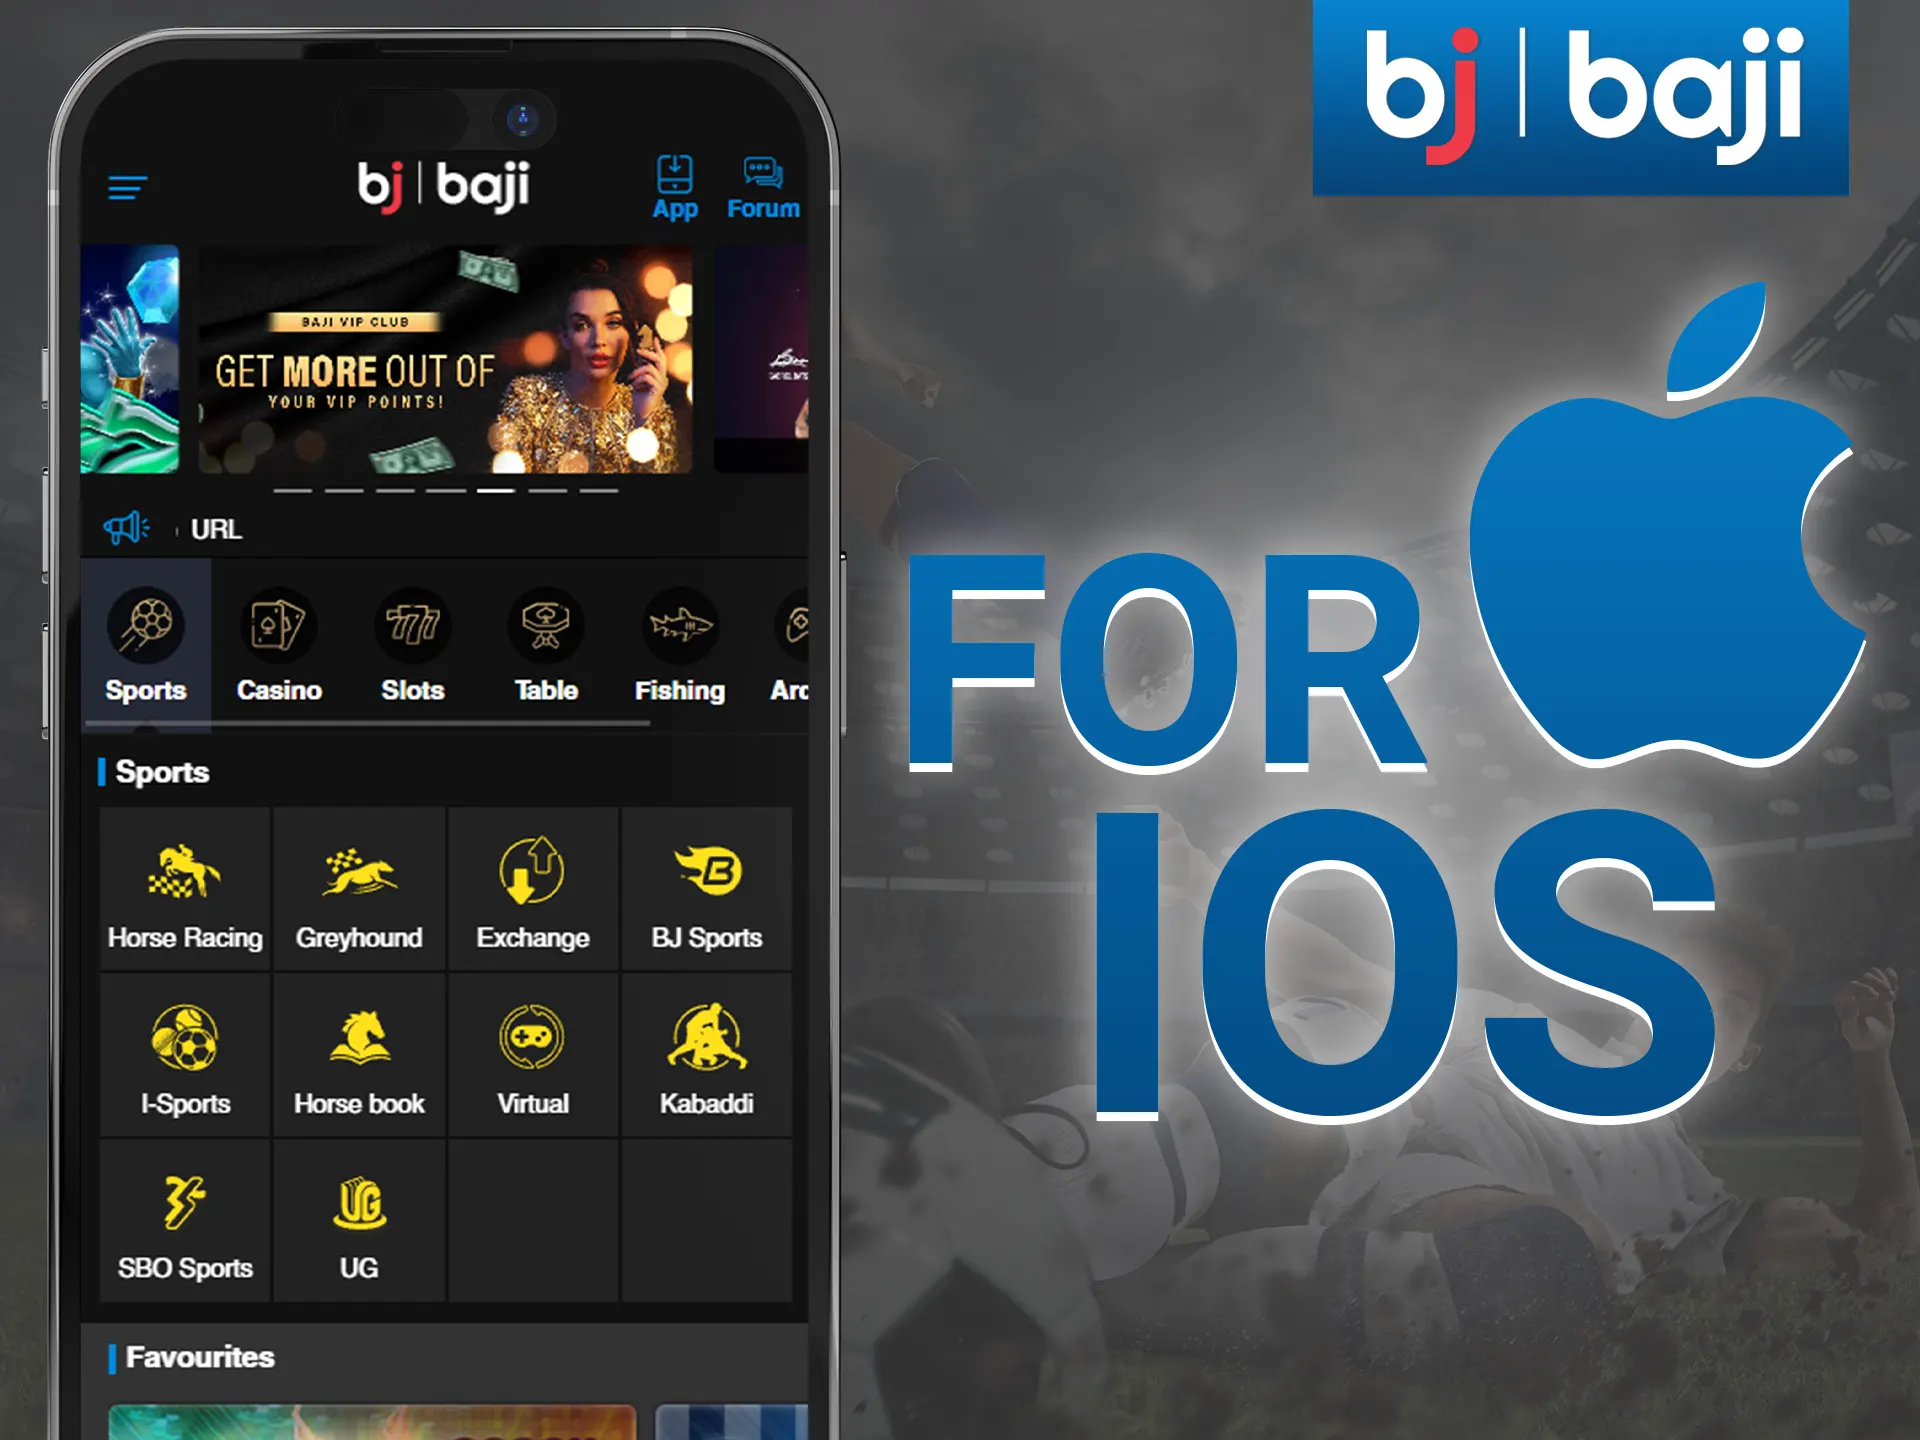 Use the iOS app to bet on Baji Live from your mobile device.